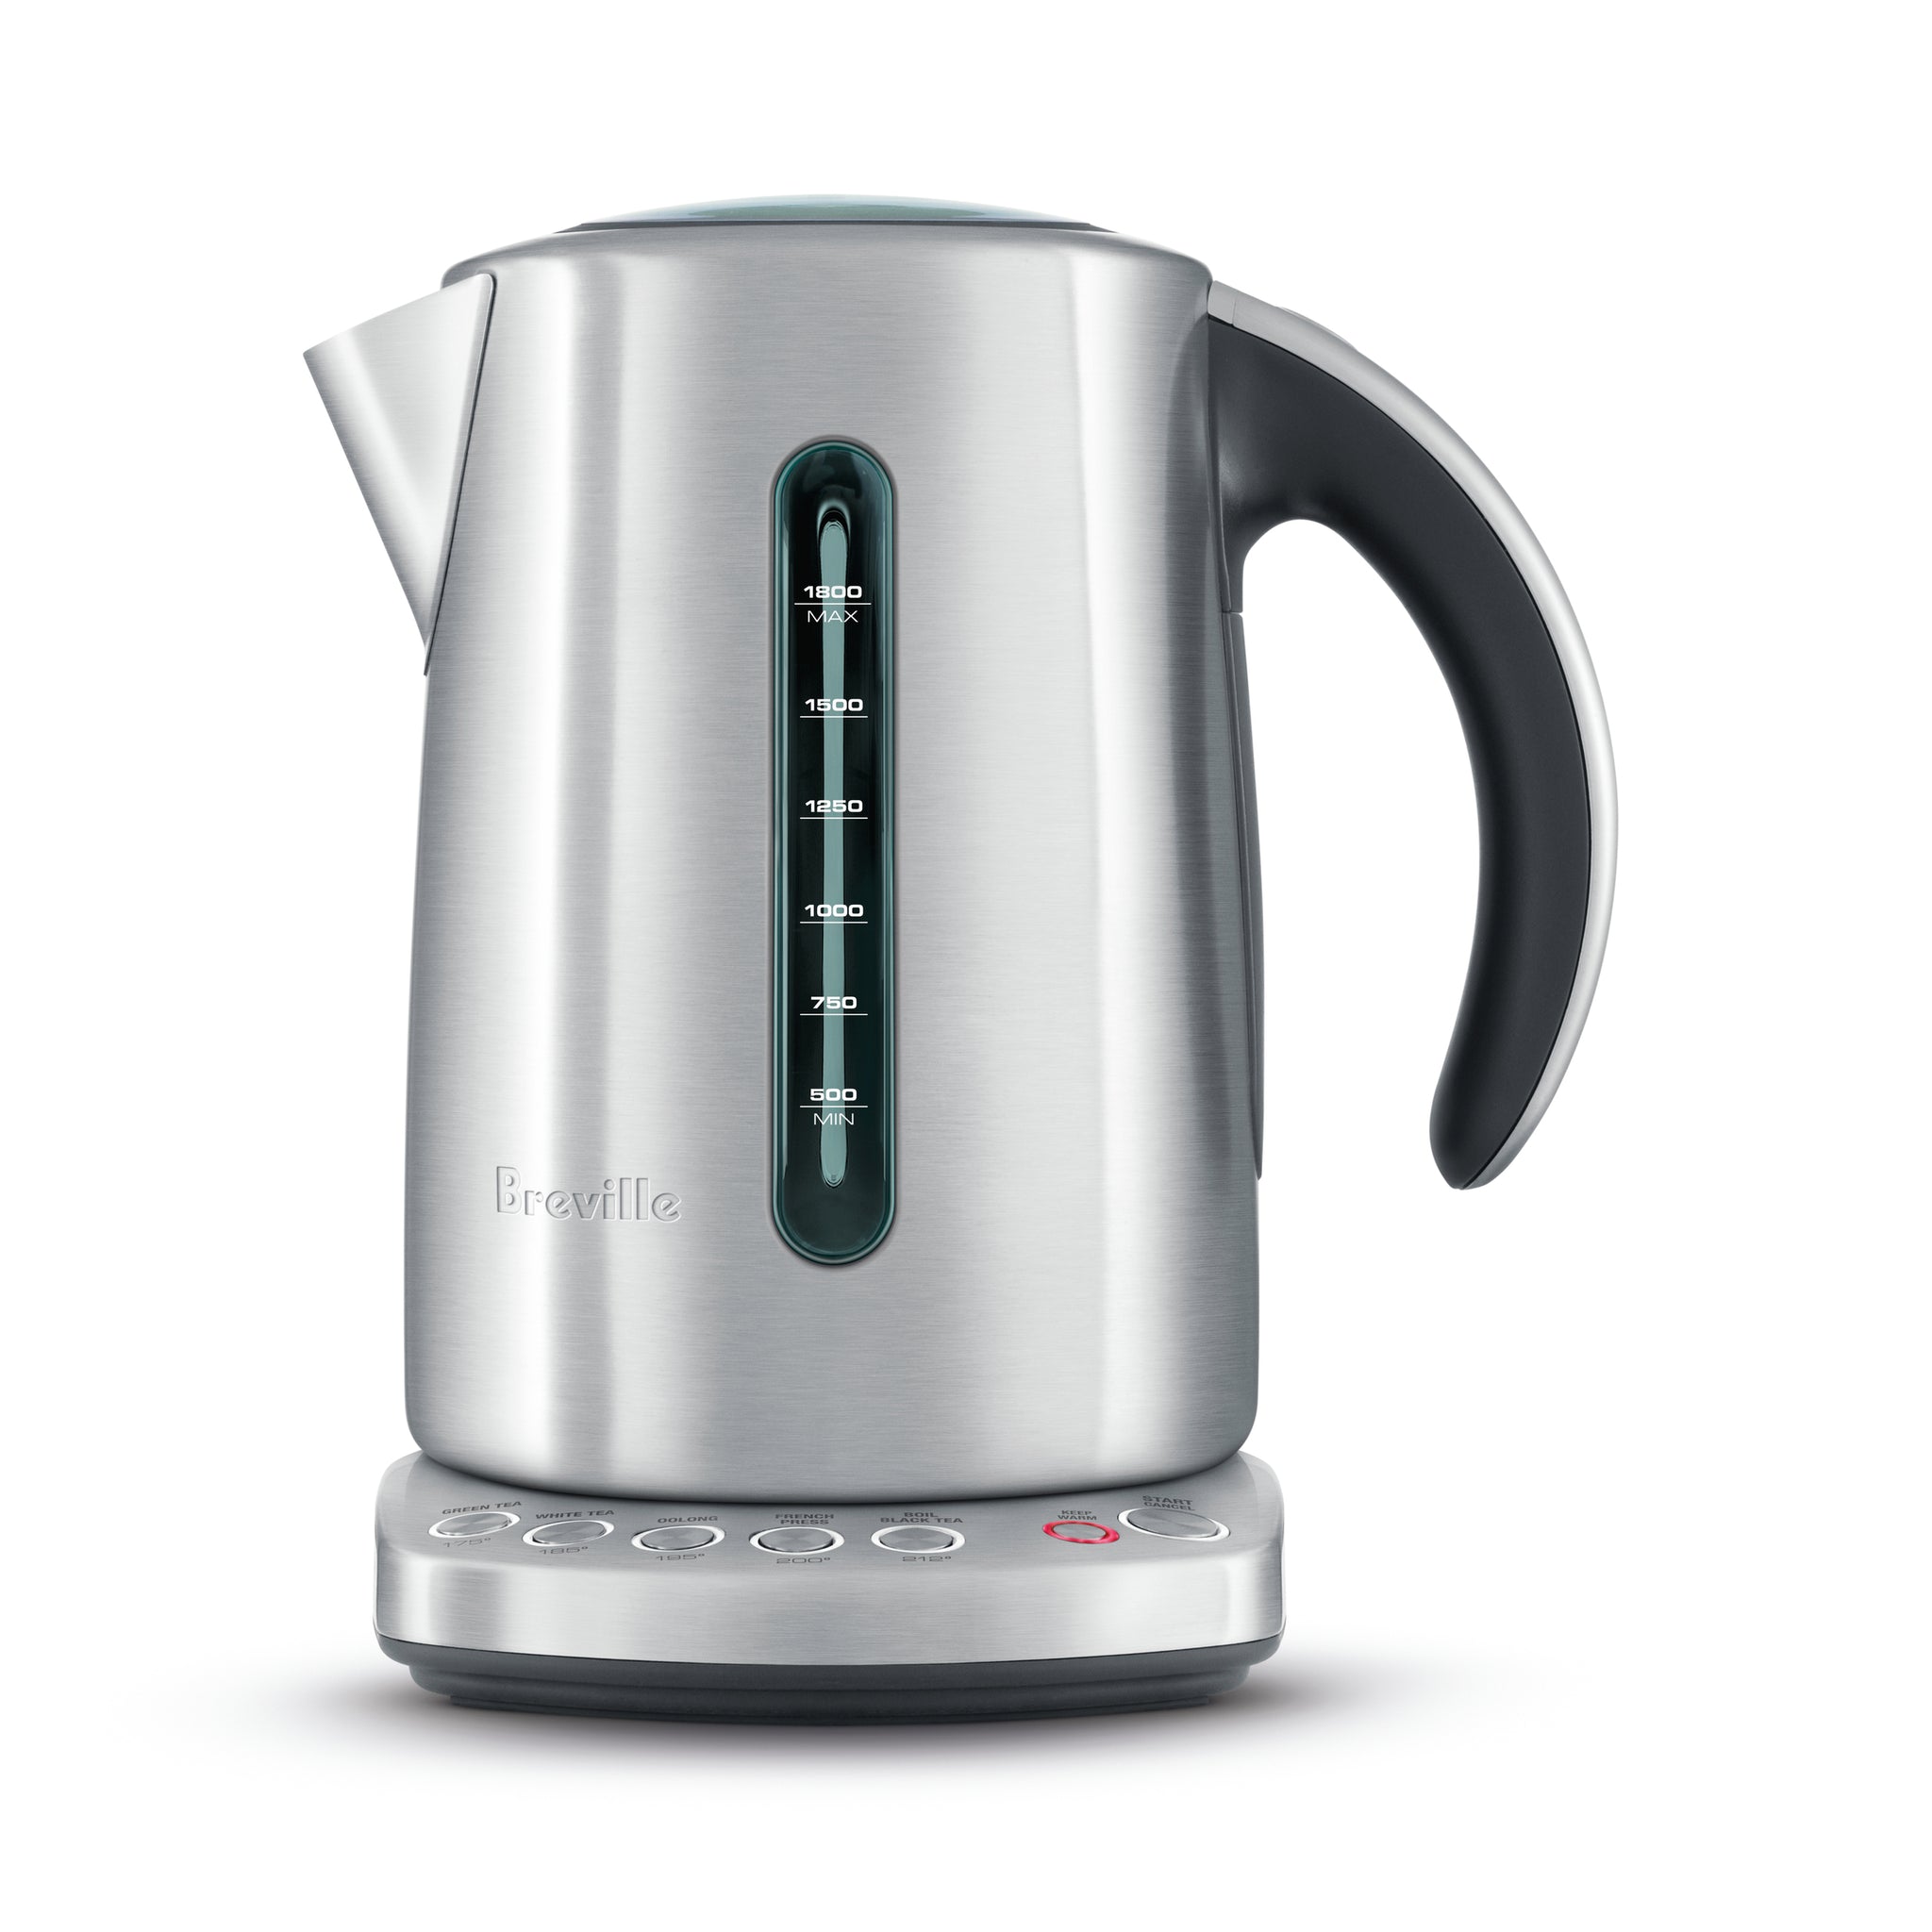 How to Make Tea in an Electric Kettle (The right way)